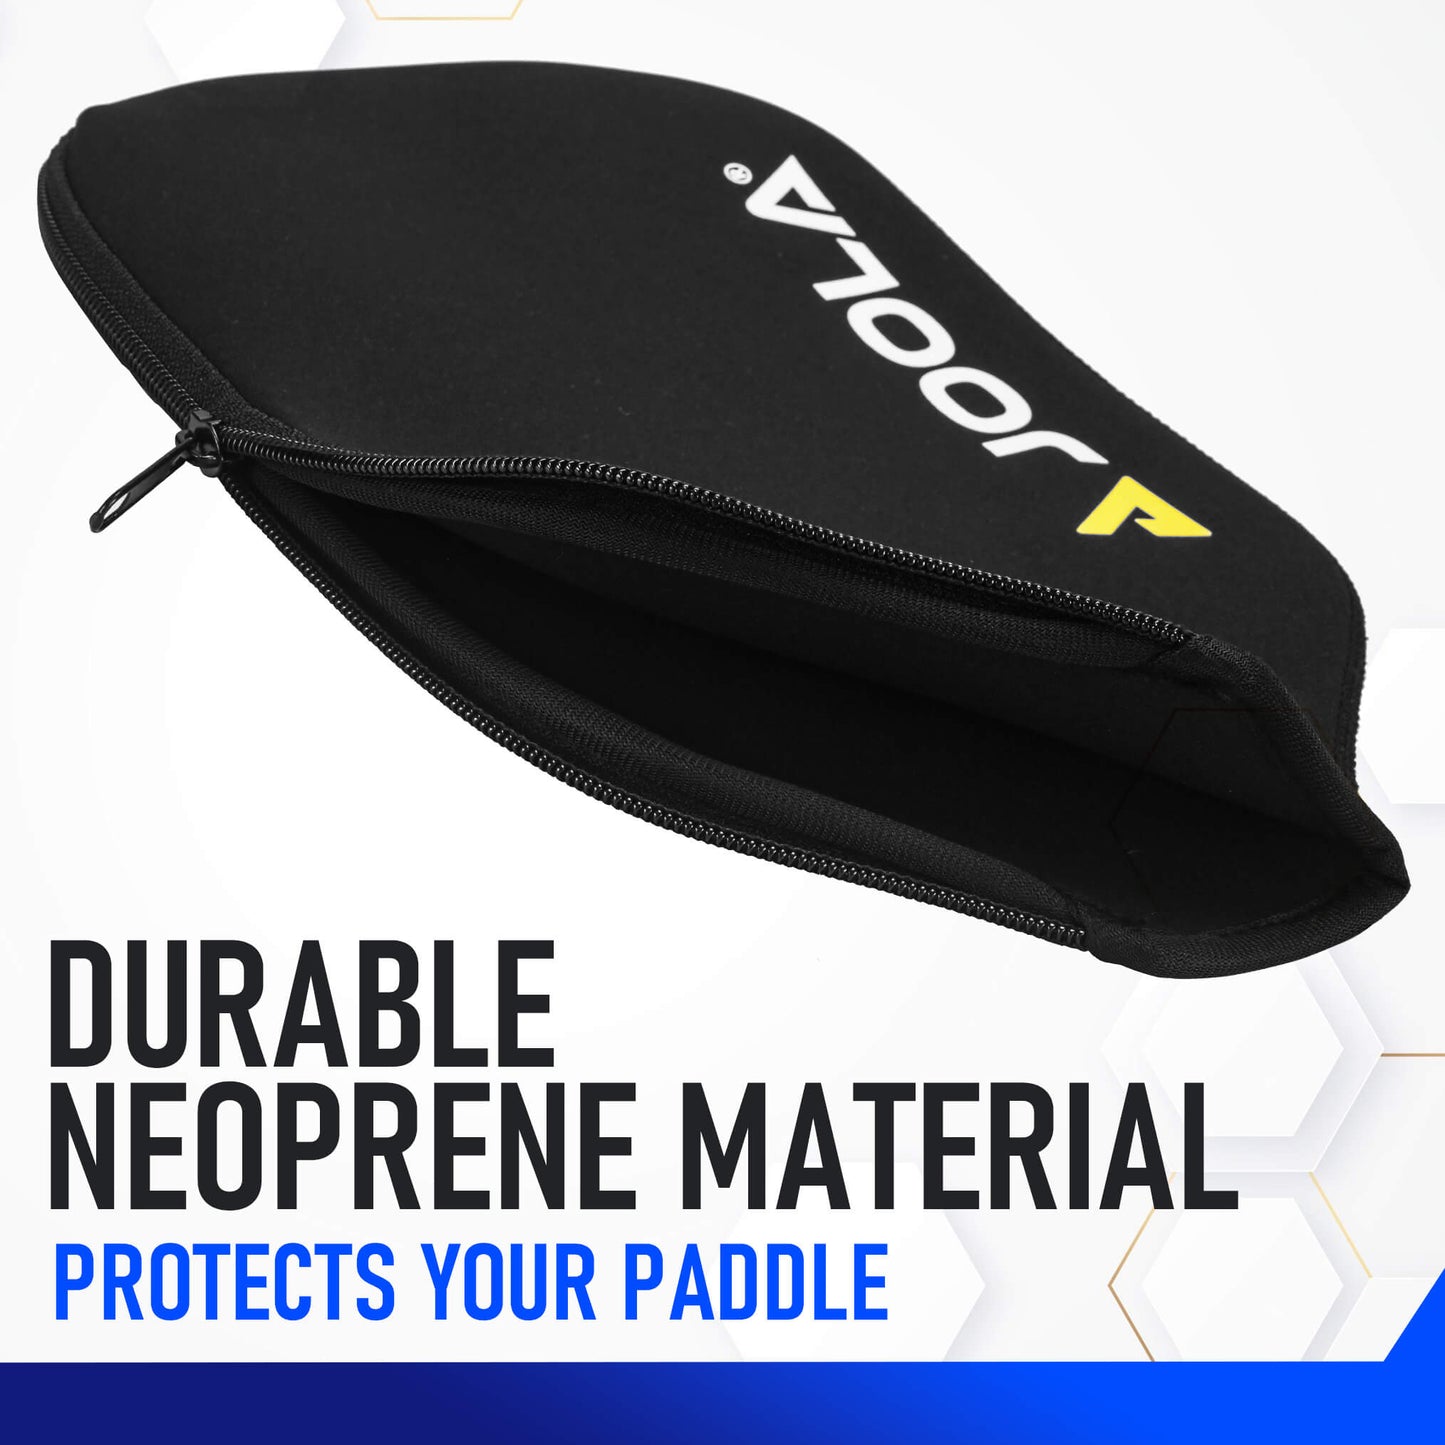 Durable JOOLA Elongated Neoprene Sleeve Pickleball Paddle Cover protects your paddle.